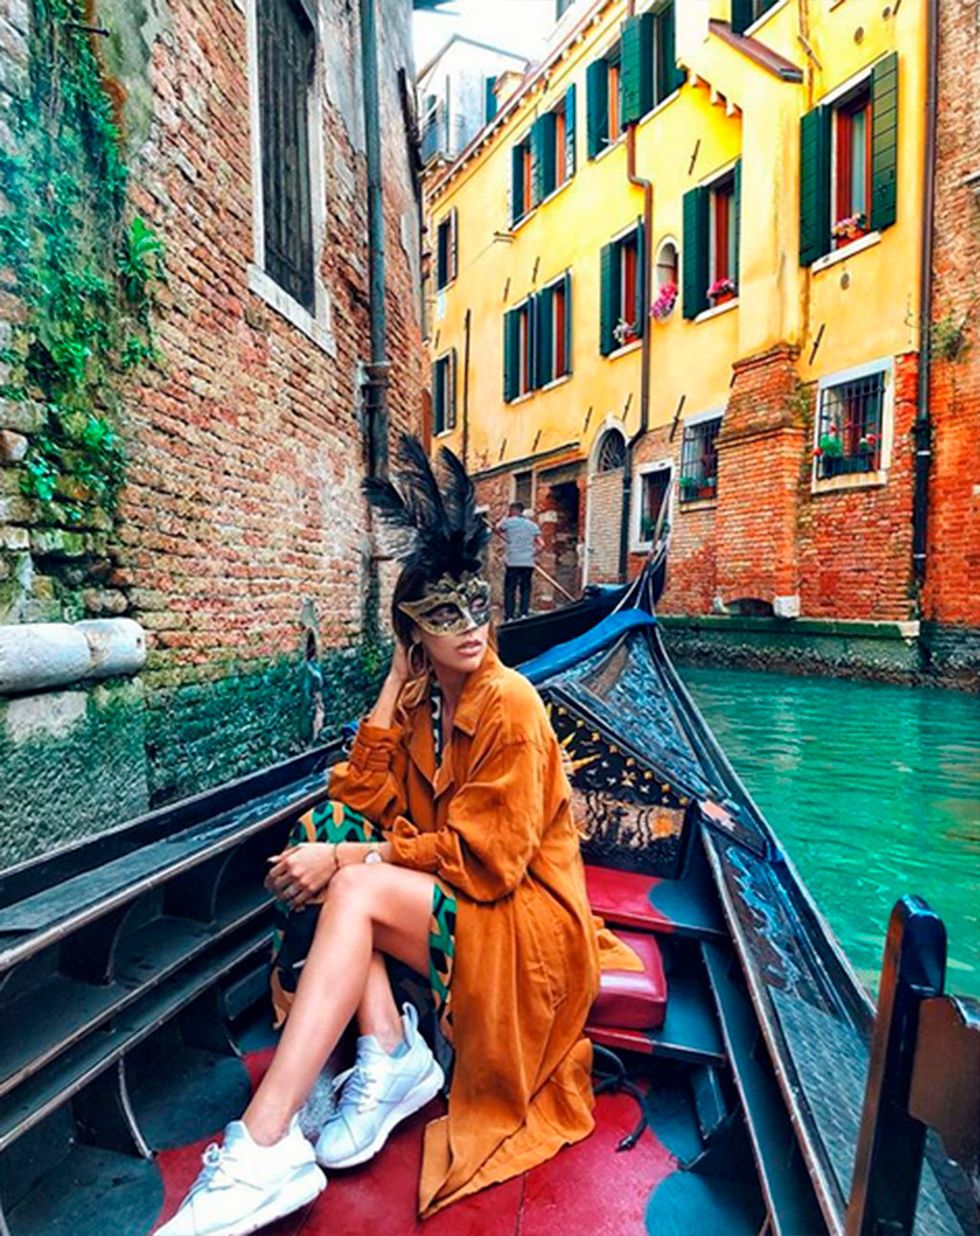 Waterway, Gondola, Boat, Canal, Water, Vehicle, Vacation, Architecture, Summer, Street, 